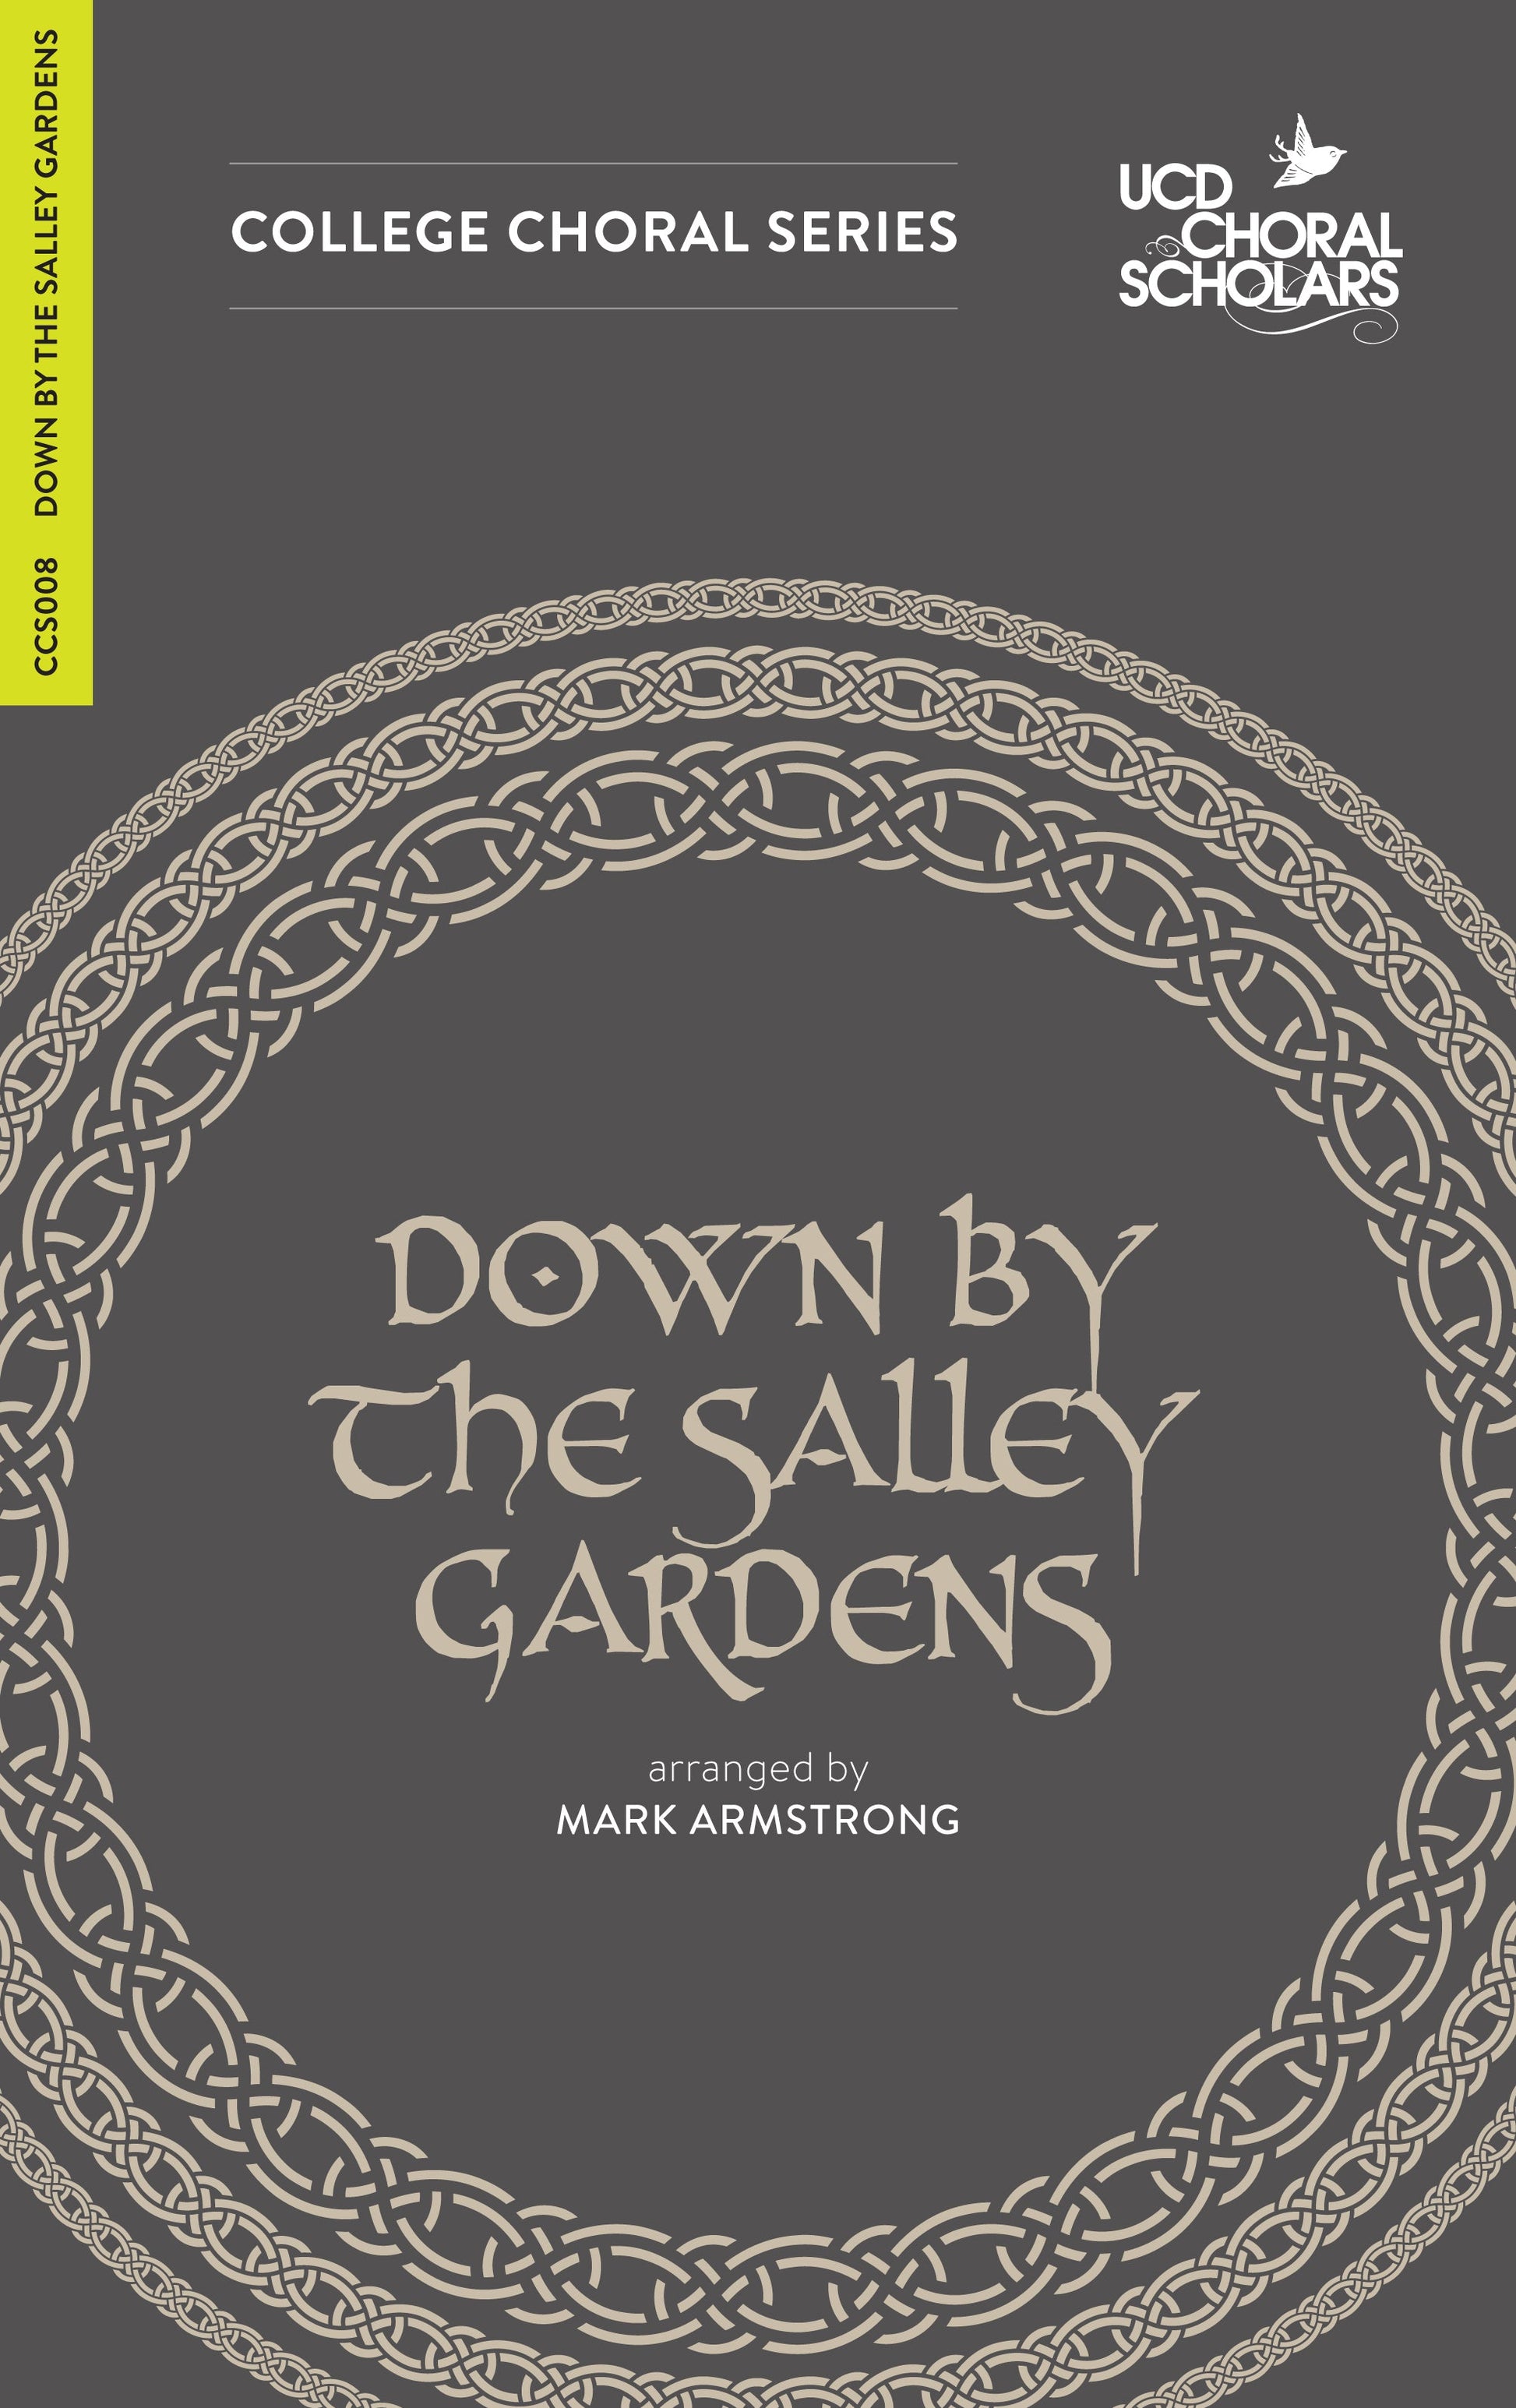 down-by-the-salley-gardens-itish-choral-sheet-music